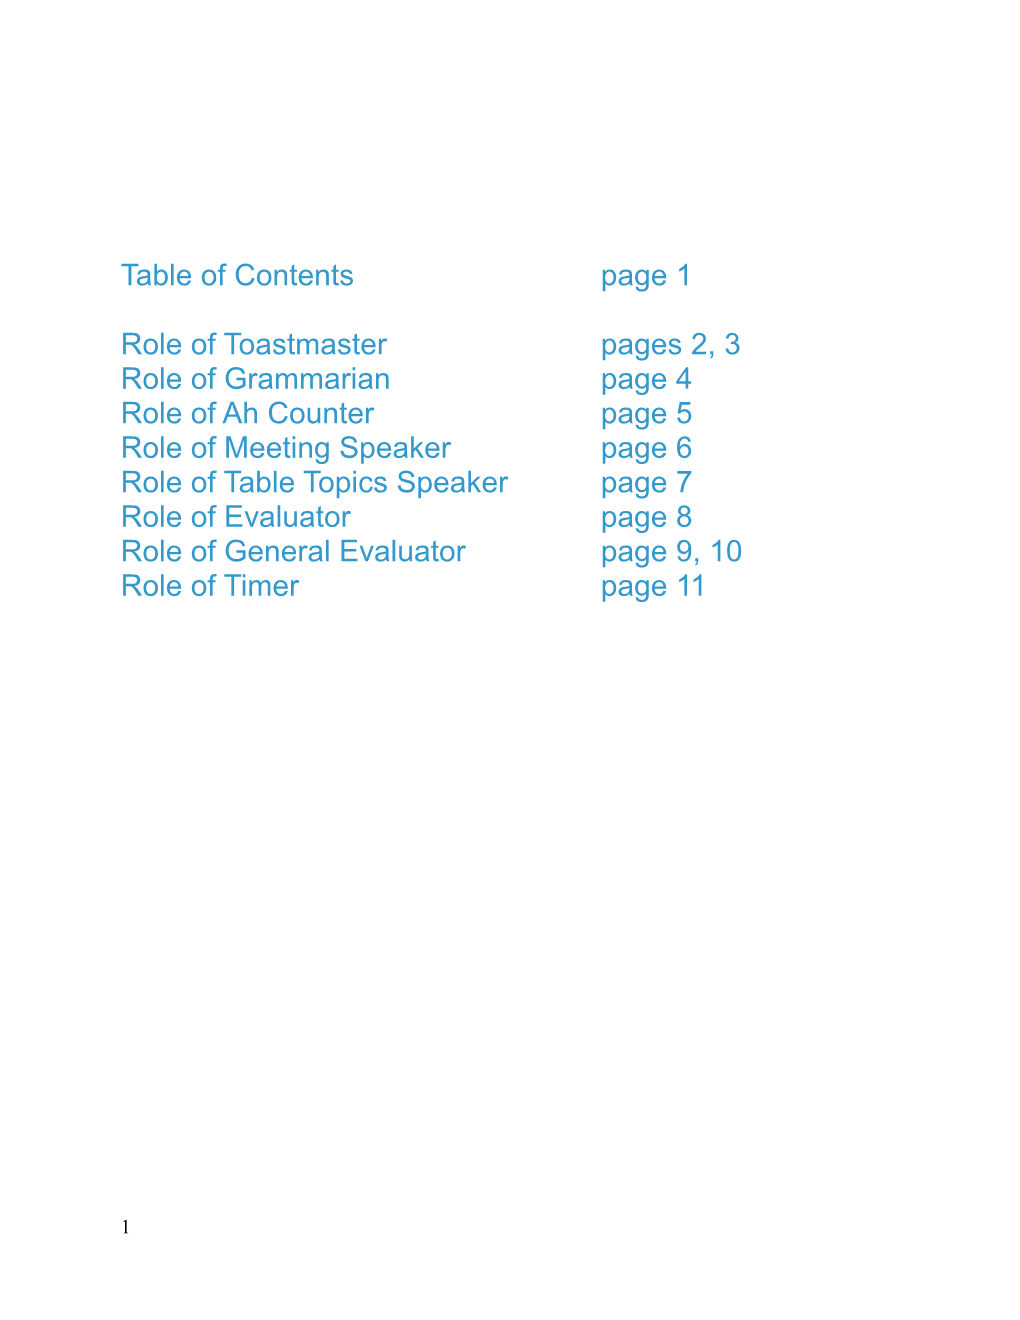 Table of Contentspage 1